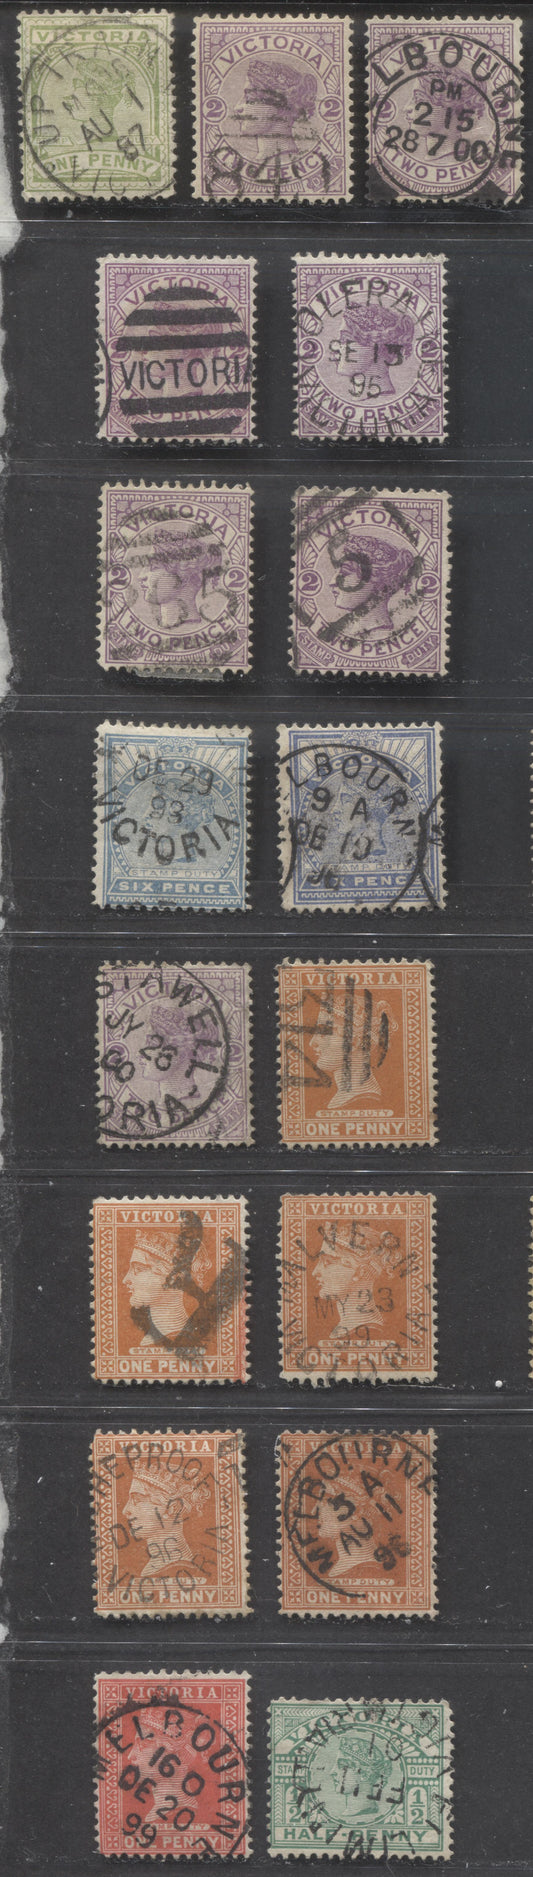 Lot 313 Australia - Victoria SC#161-180 1886-1899 Stamp Duty Keyplates, With SON Town, Railway and Numeral Cancels, 17 VG, F & VF Used Singles, Click on Listing to See ALL Pictures, Estimated Value $15